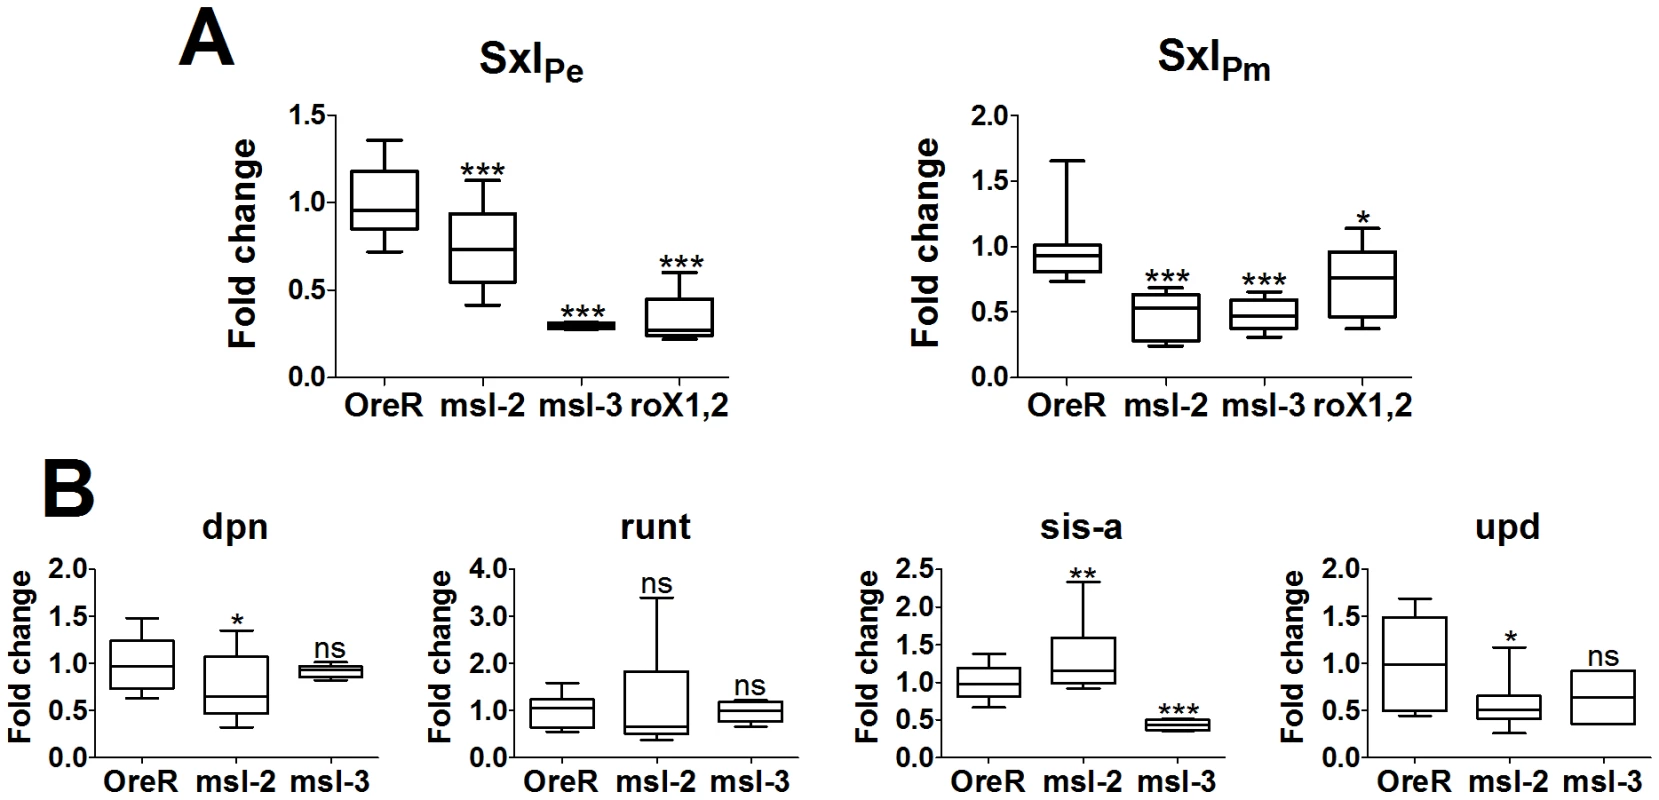 Change in mRNA expression for dosage compensated and control genes compared to Ore R.